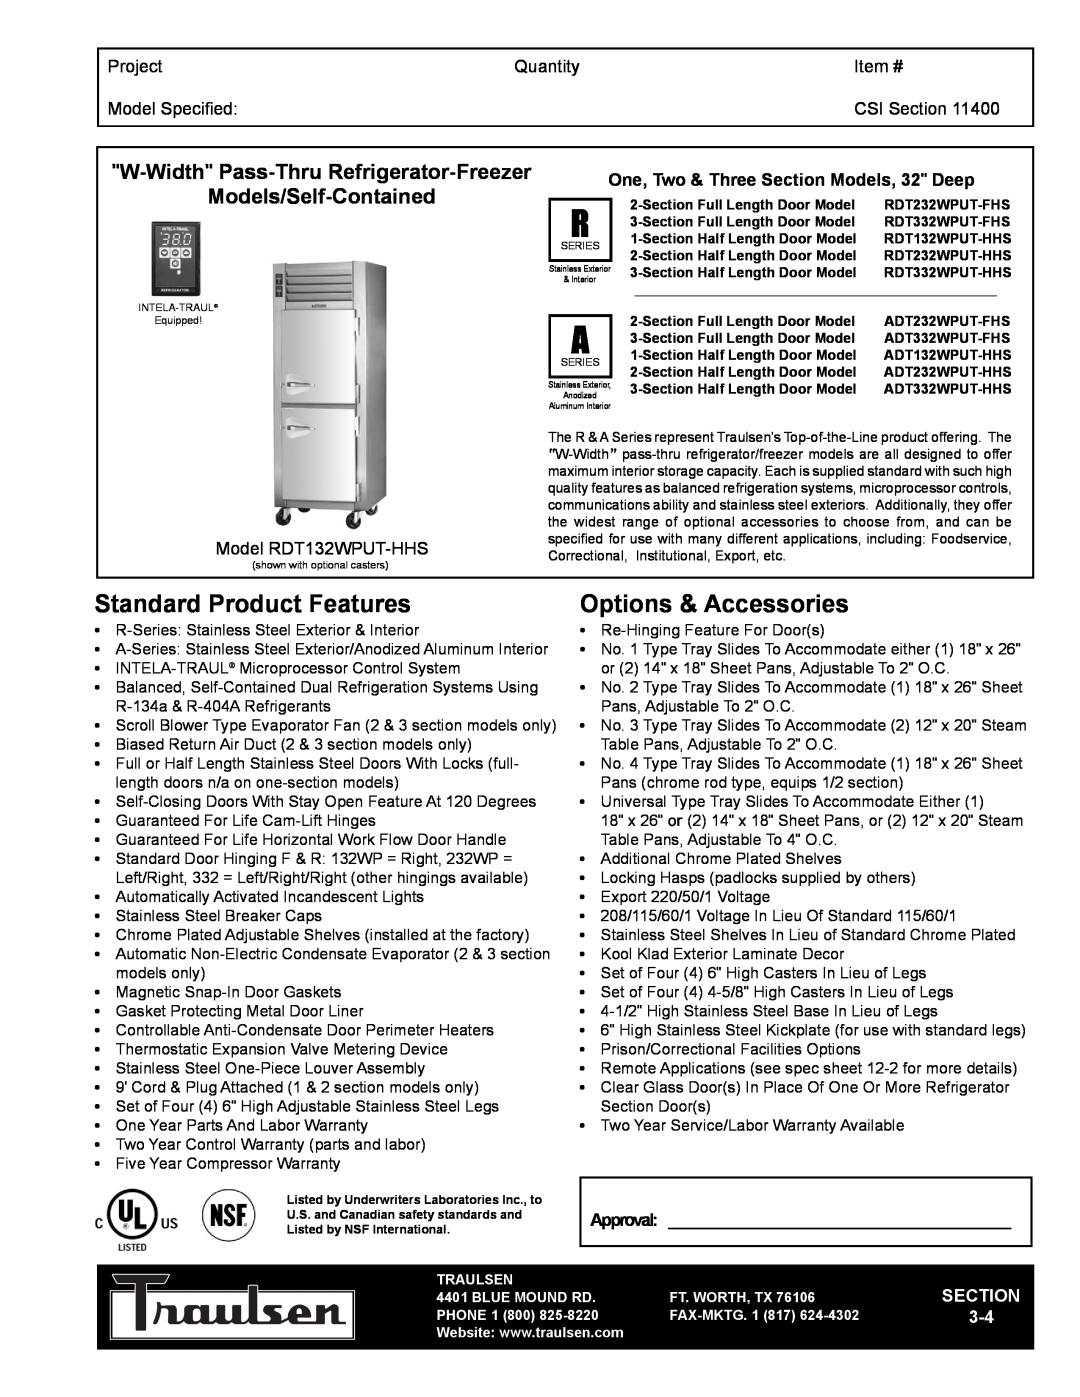 Traulsen RDT132WPUT-HHS warranty W-Width Pass-Thru Refrigerator-Freezer, Models/Self-Contained, Project, Quantity, Item # 